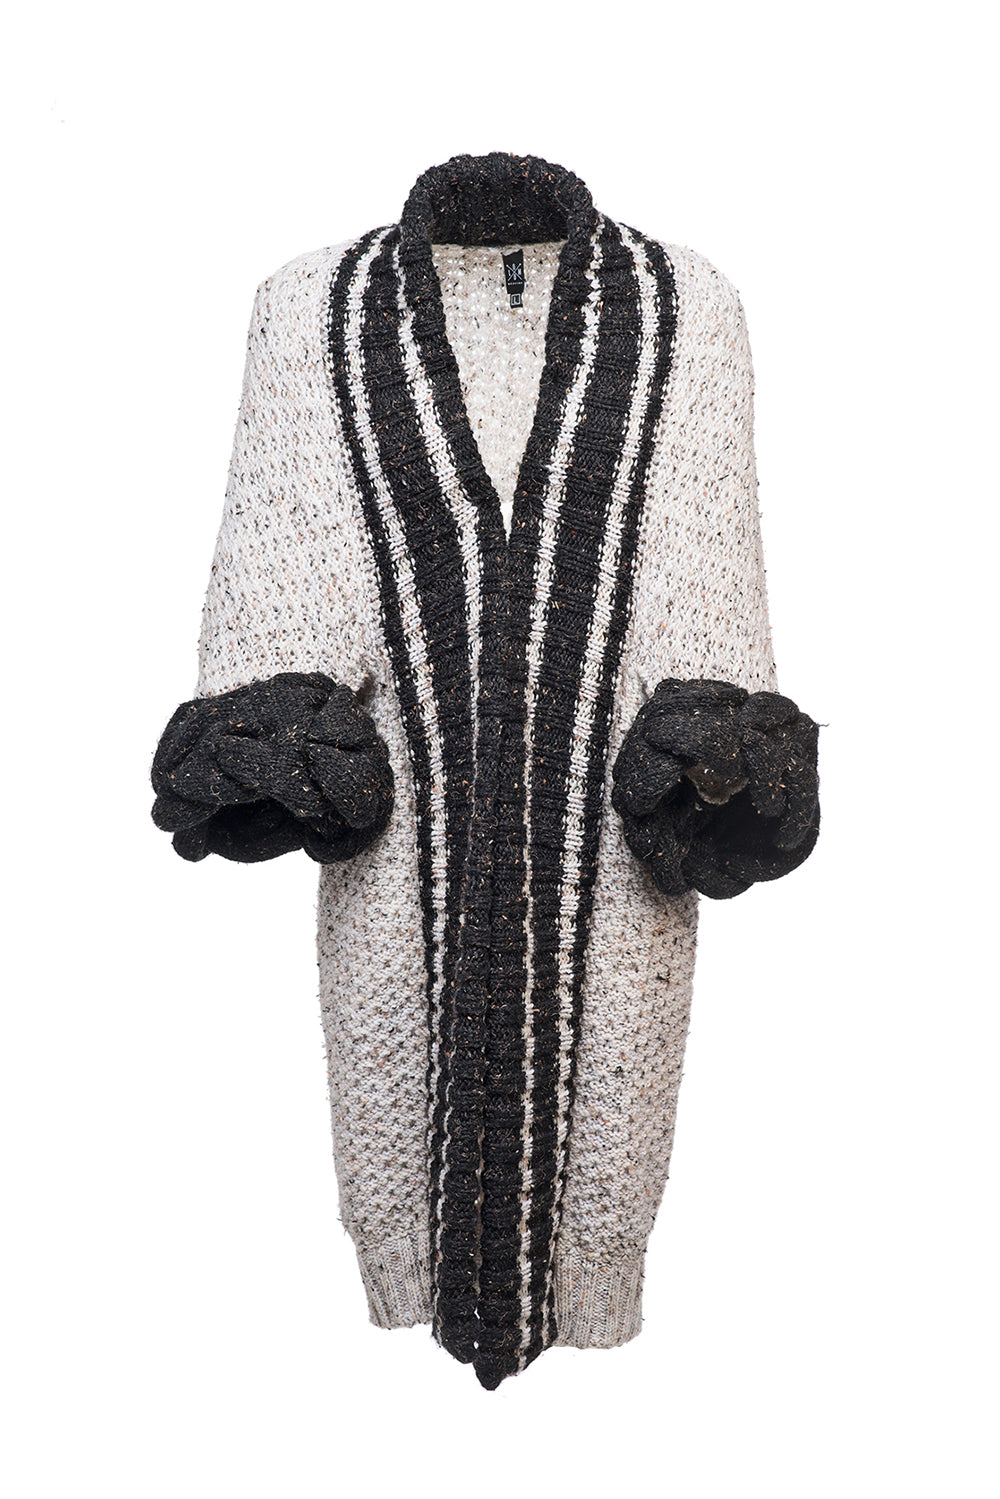 Knitted white-tweed cardigan by LOOM with braids